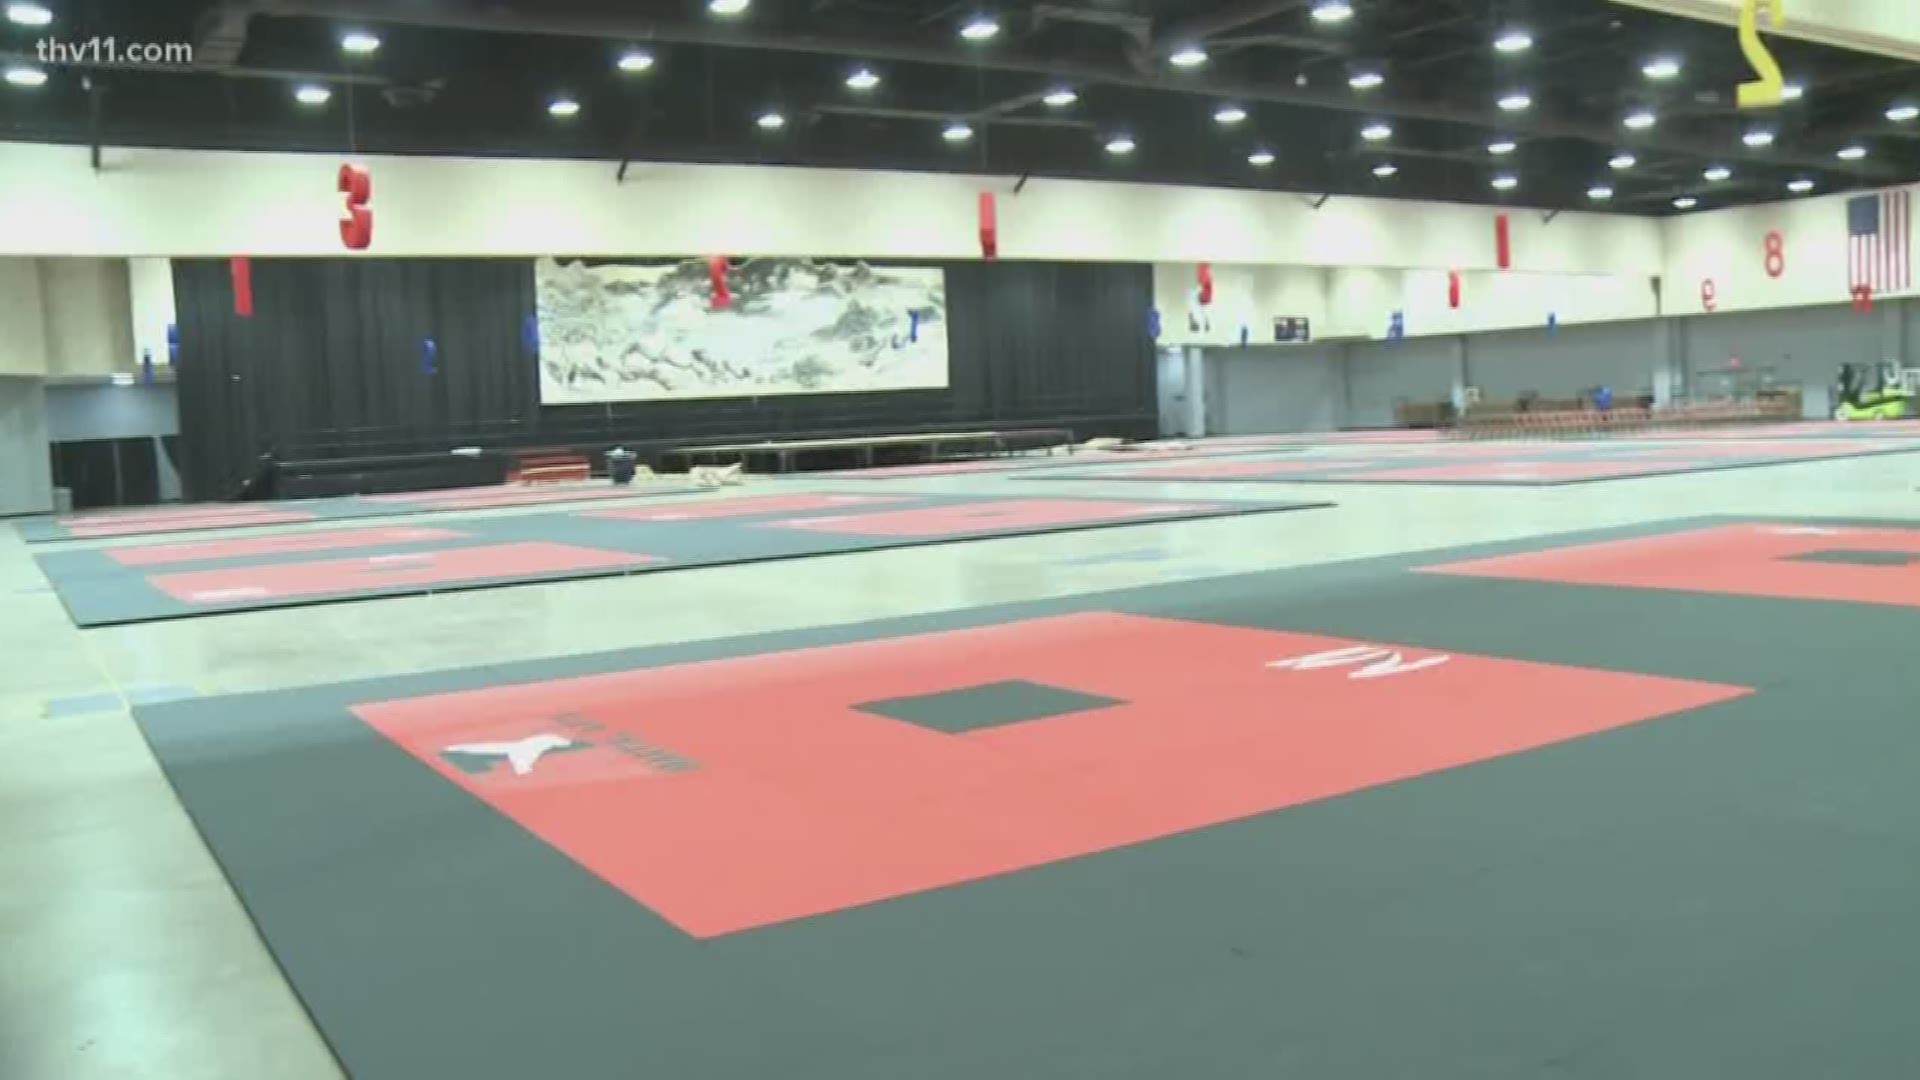 ATA martial arts is hosting its World Championships in Little Rock for the 29th year. It starts tomorrow at the statehouse convention center. Local businesses are preparing for the thousands of visitors coming to town.